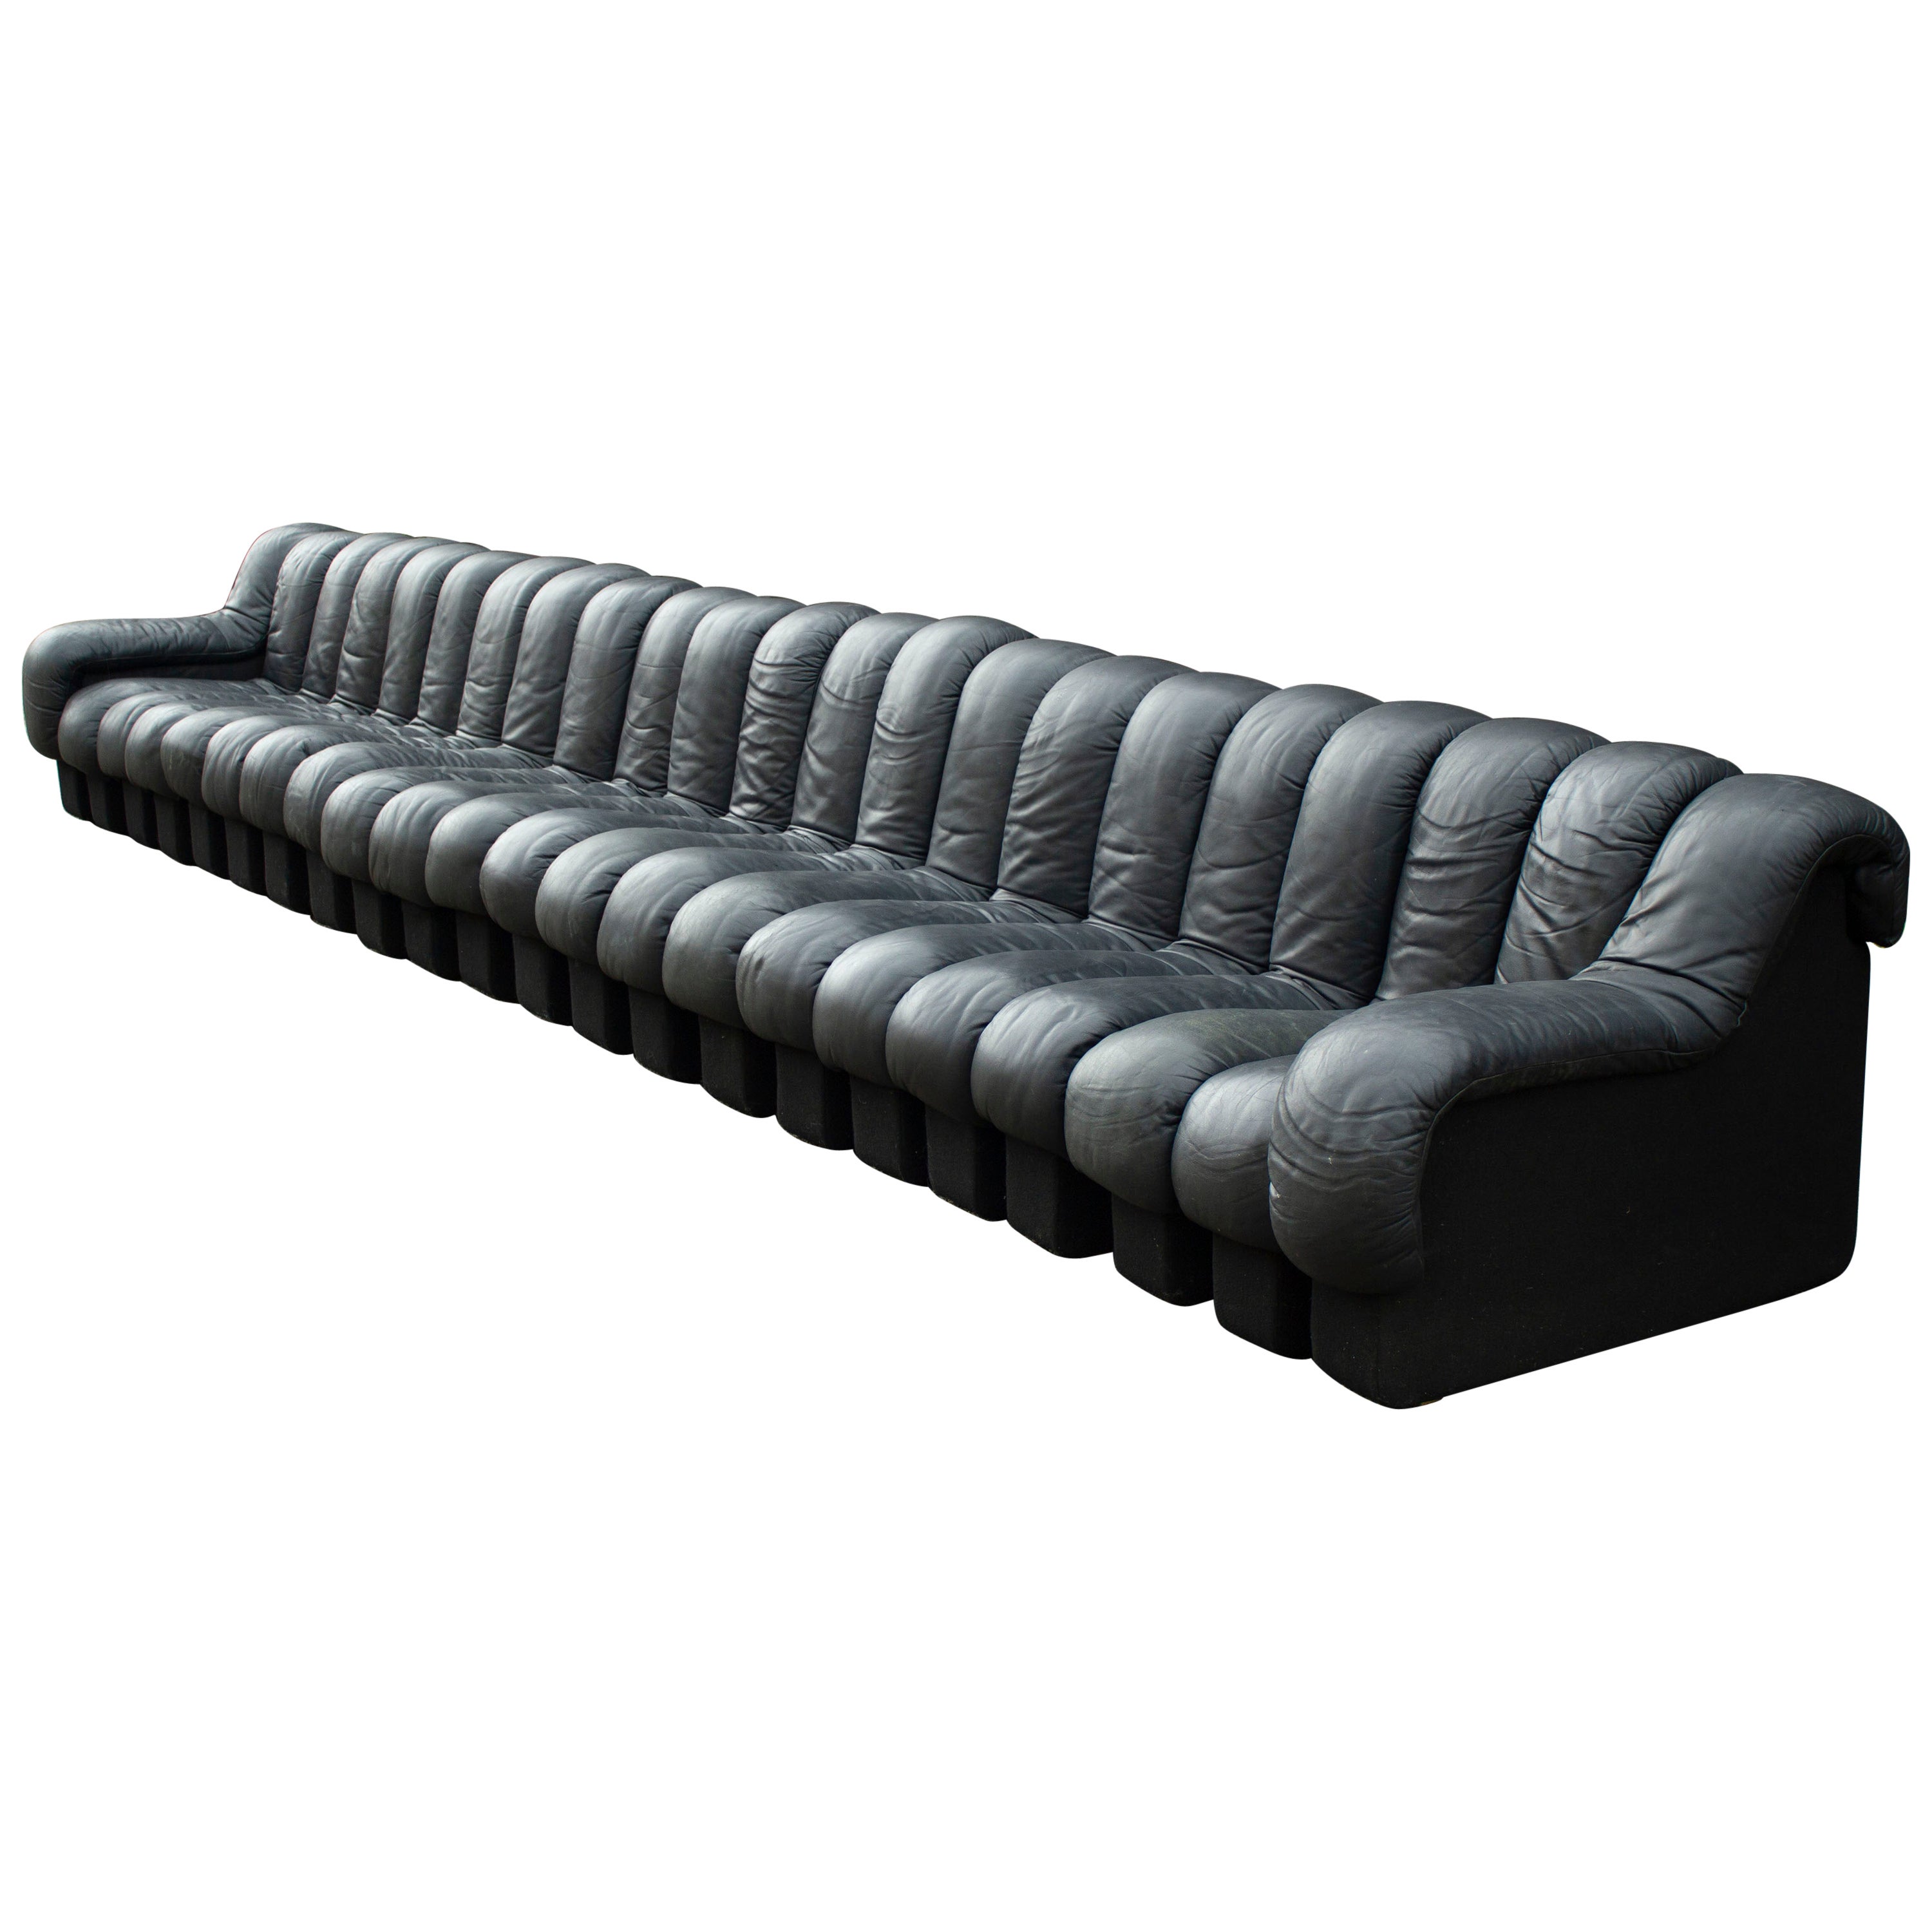 De Sede DS-600 'Non-Stop' Tatzelwurm Sectional Sofa in Black Leather 22 Sections